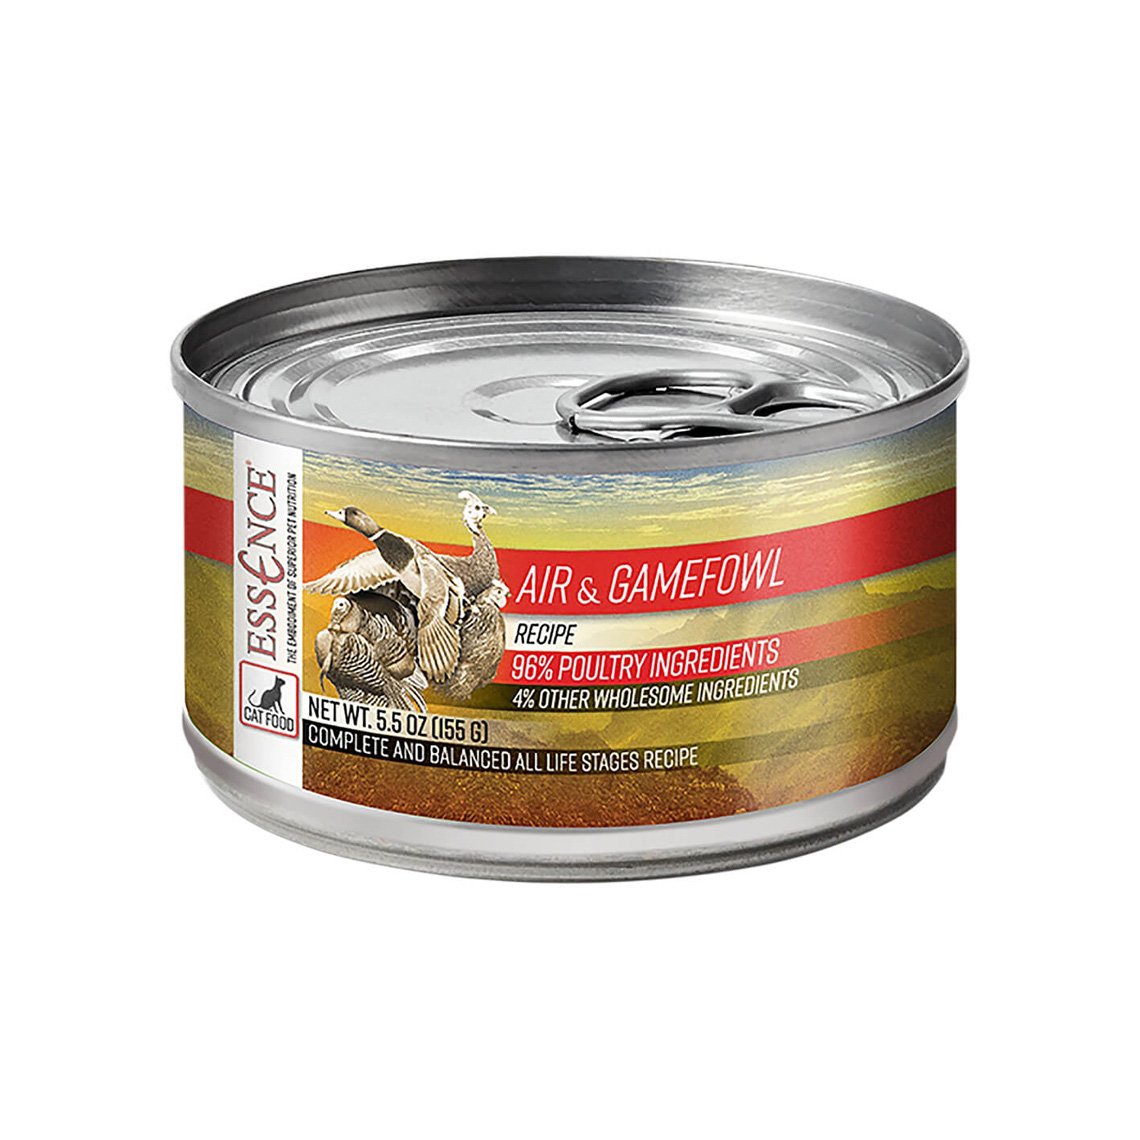 good quality canned cat food